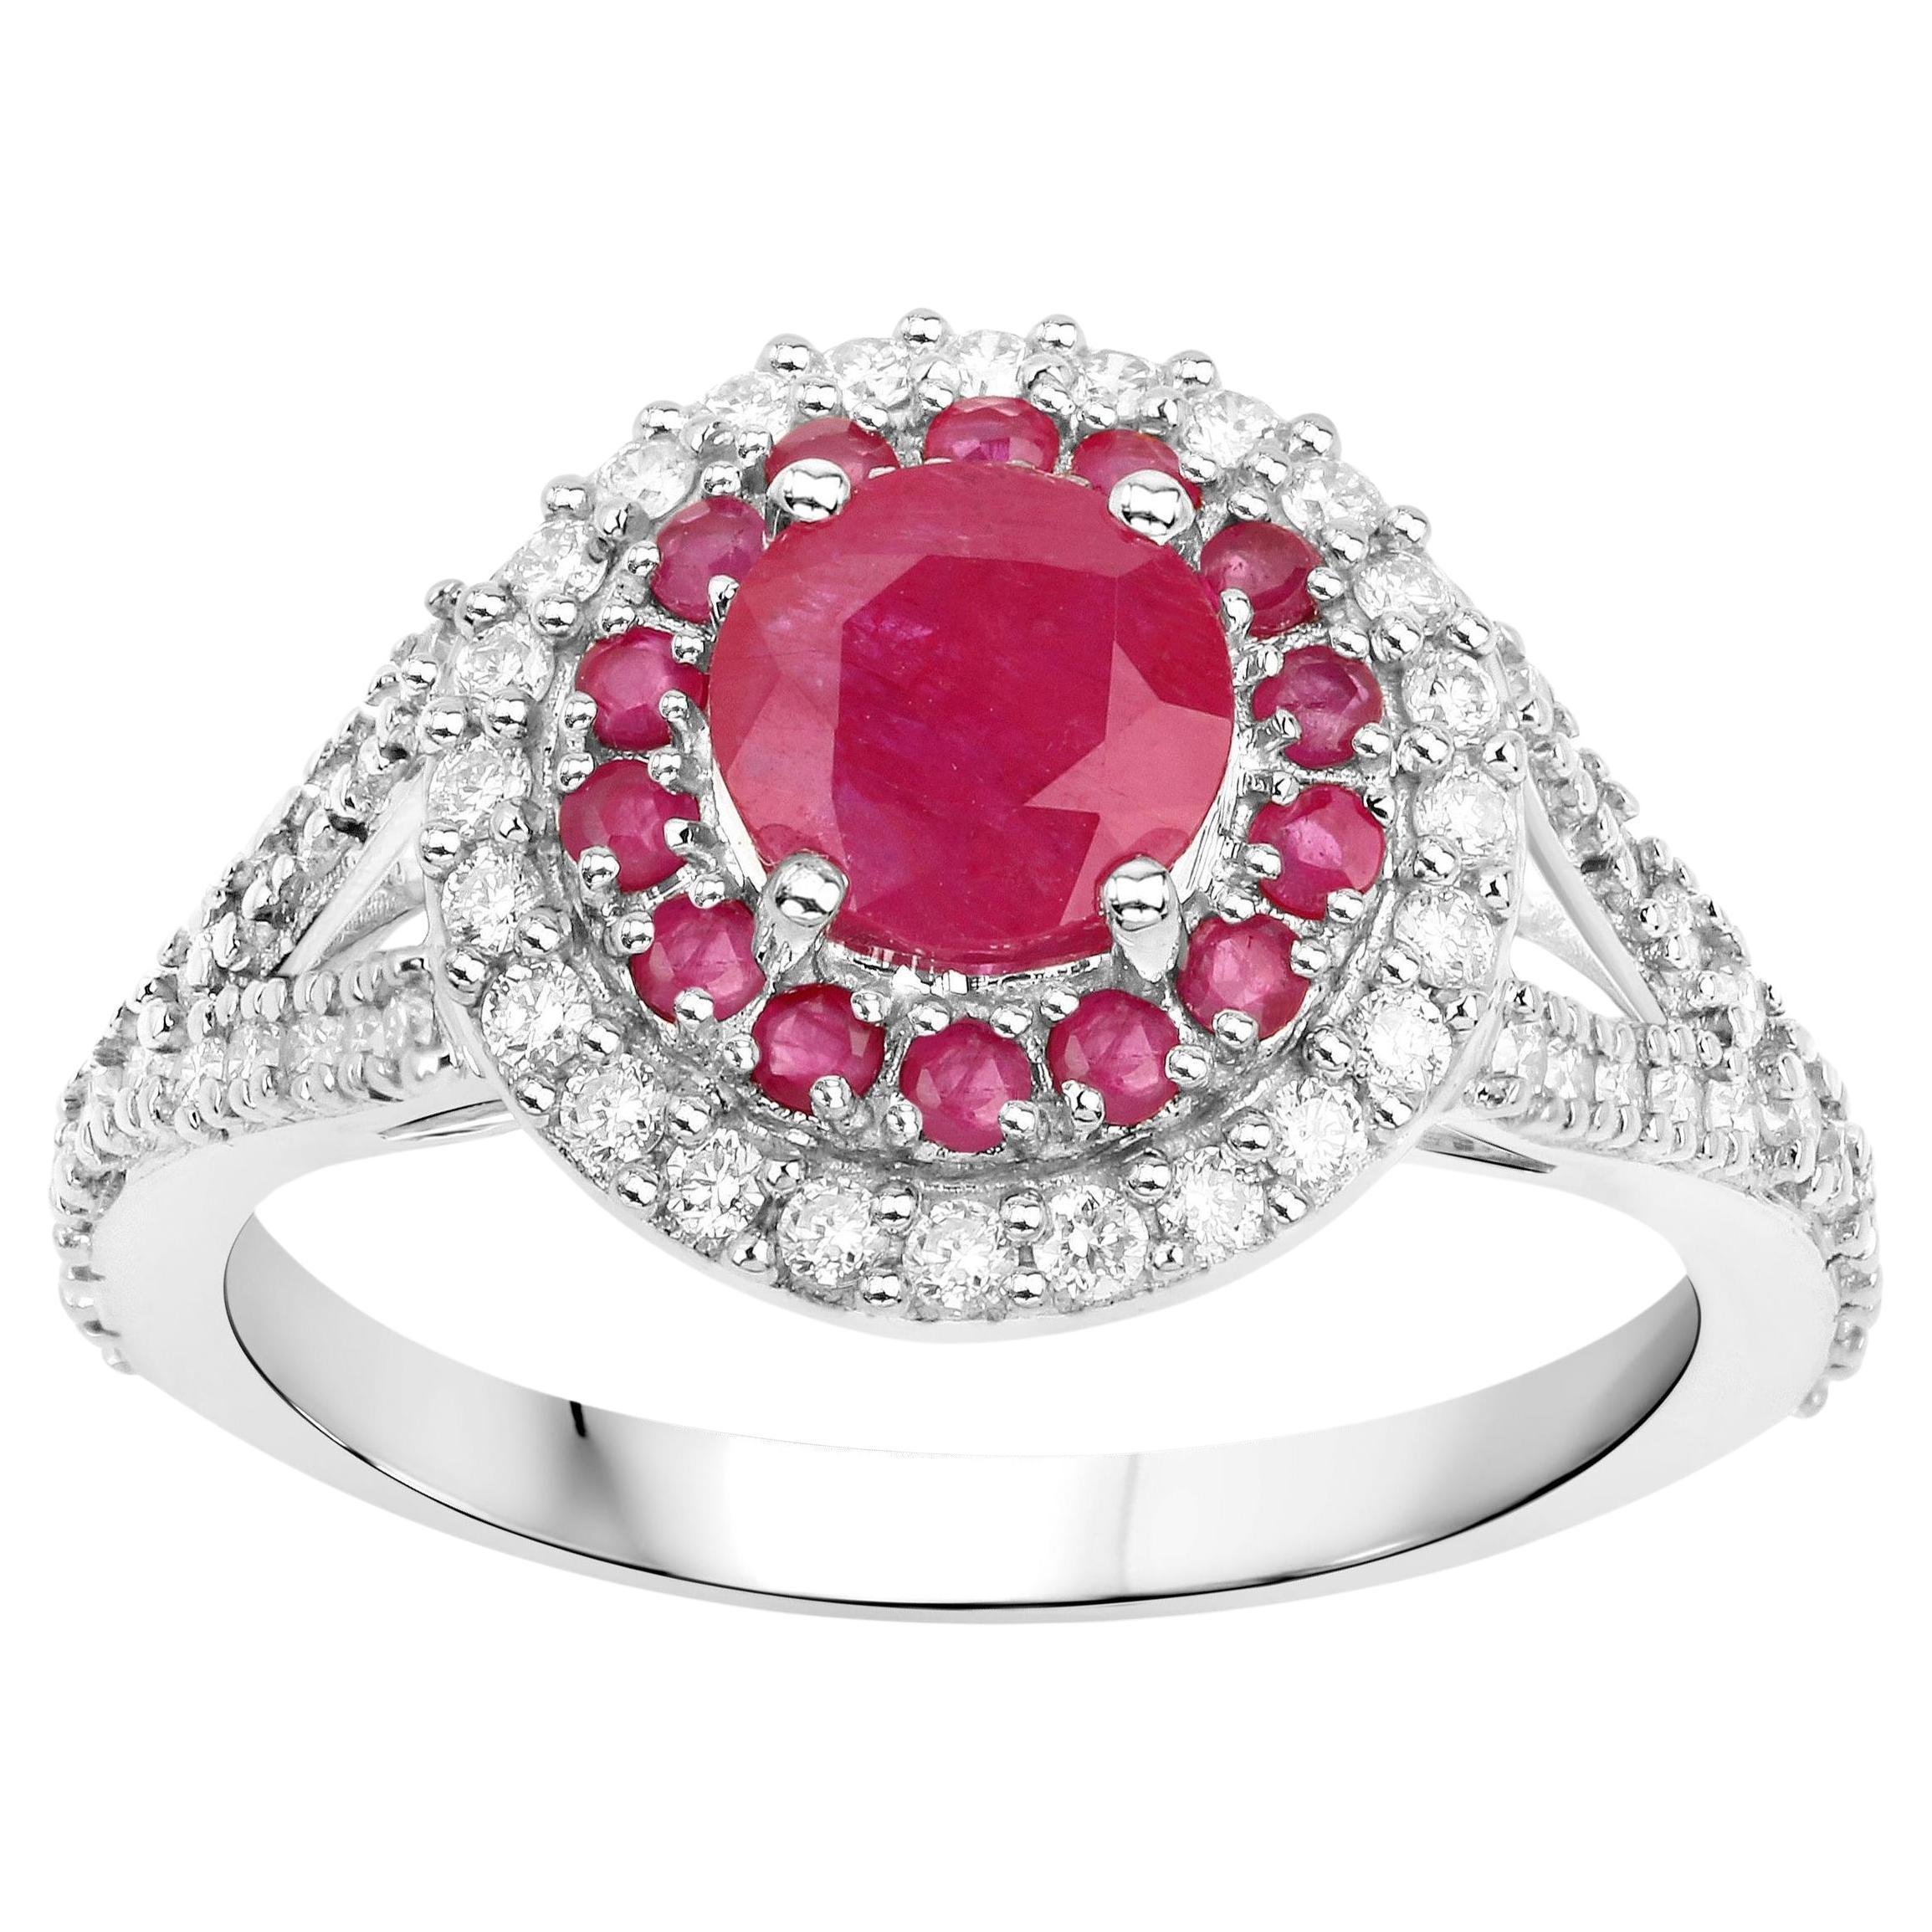 Ruby Ring With Diamonds 1.95 Carats 14K White Gold